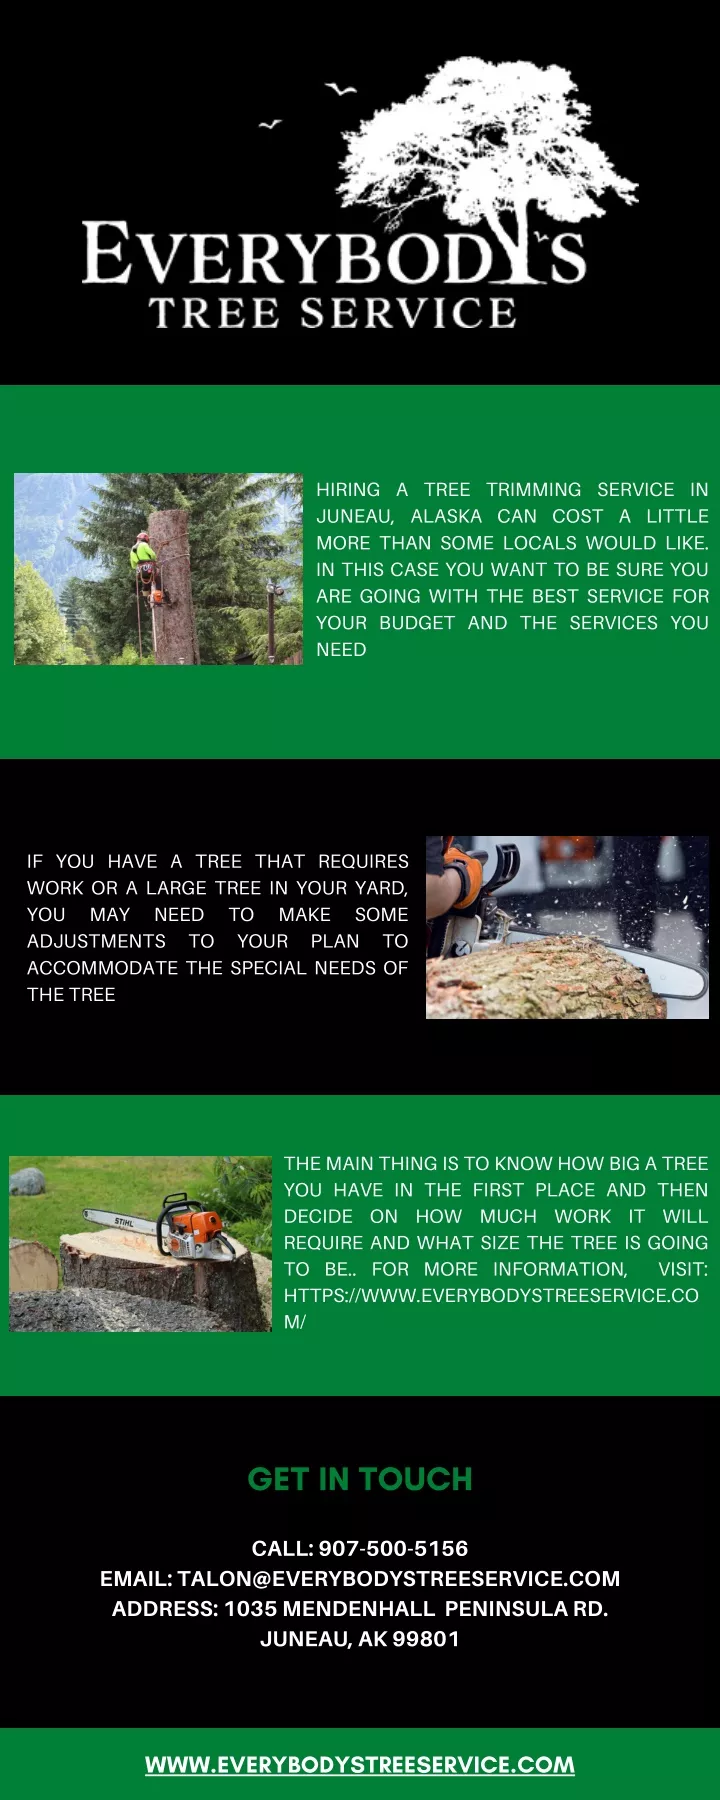 hiring a tree trimming service in